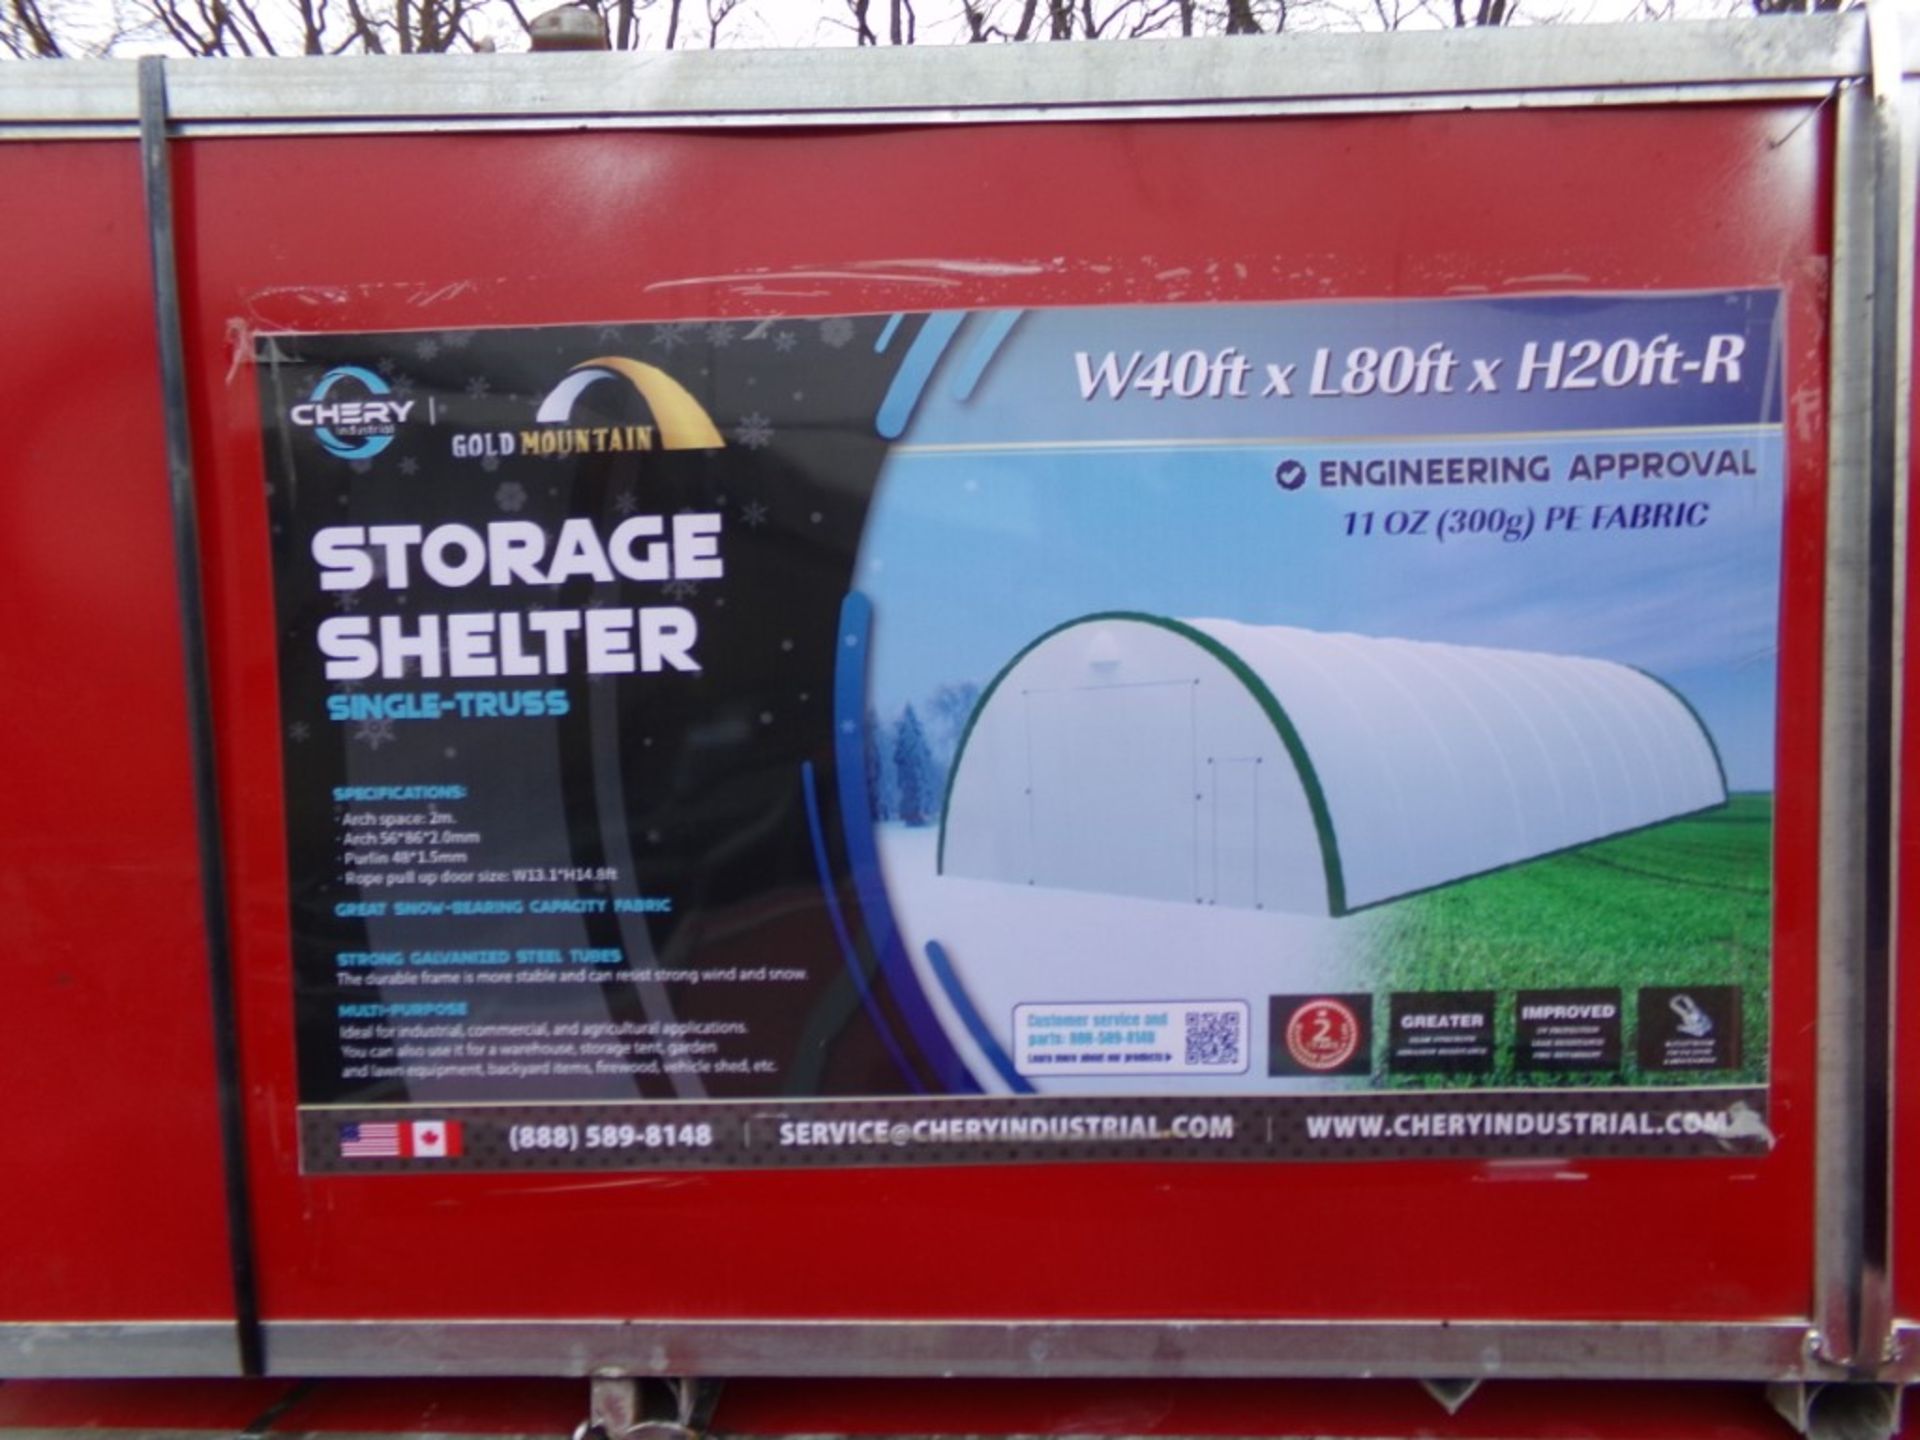 New, Chery,40' x 80' x 20' Storage Shelter, Single Truss, (In 2 Boxes) - Image 2 of 2